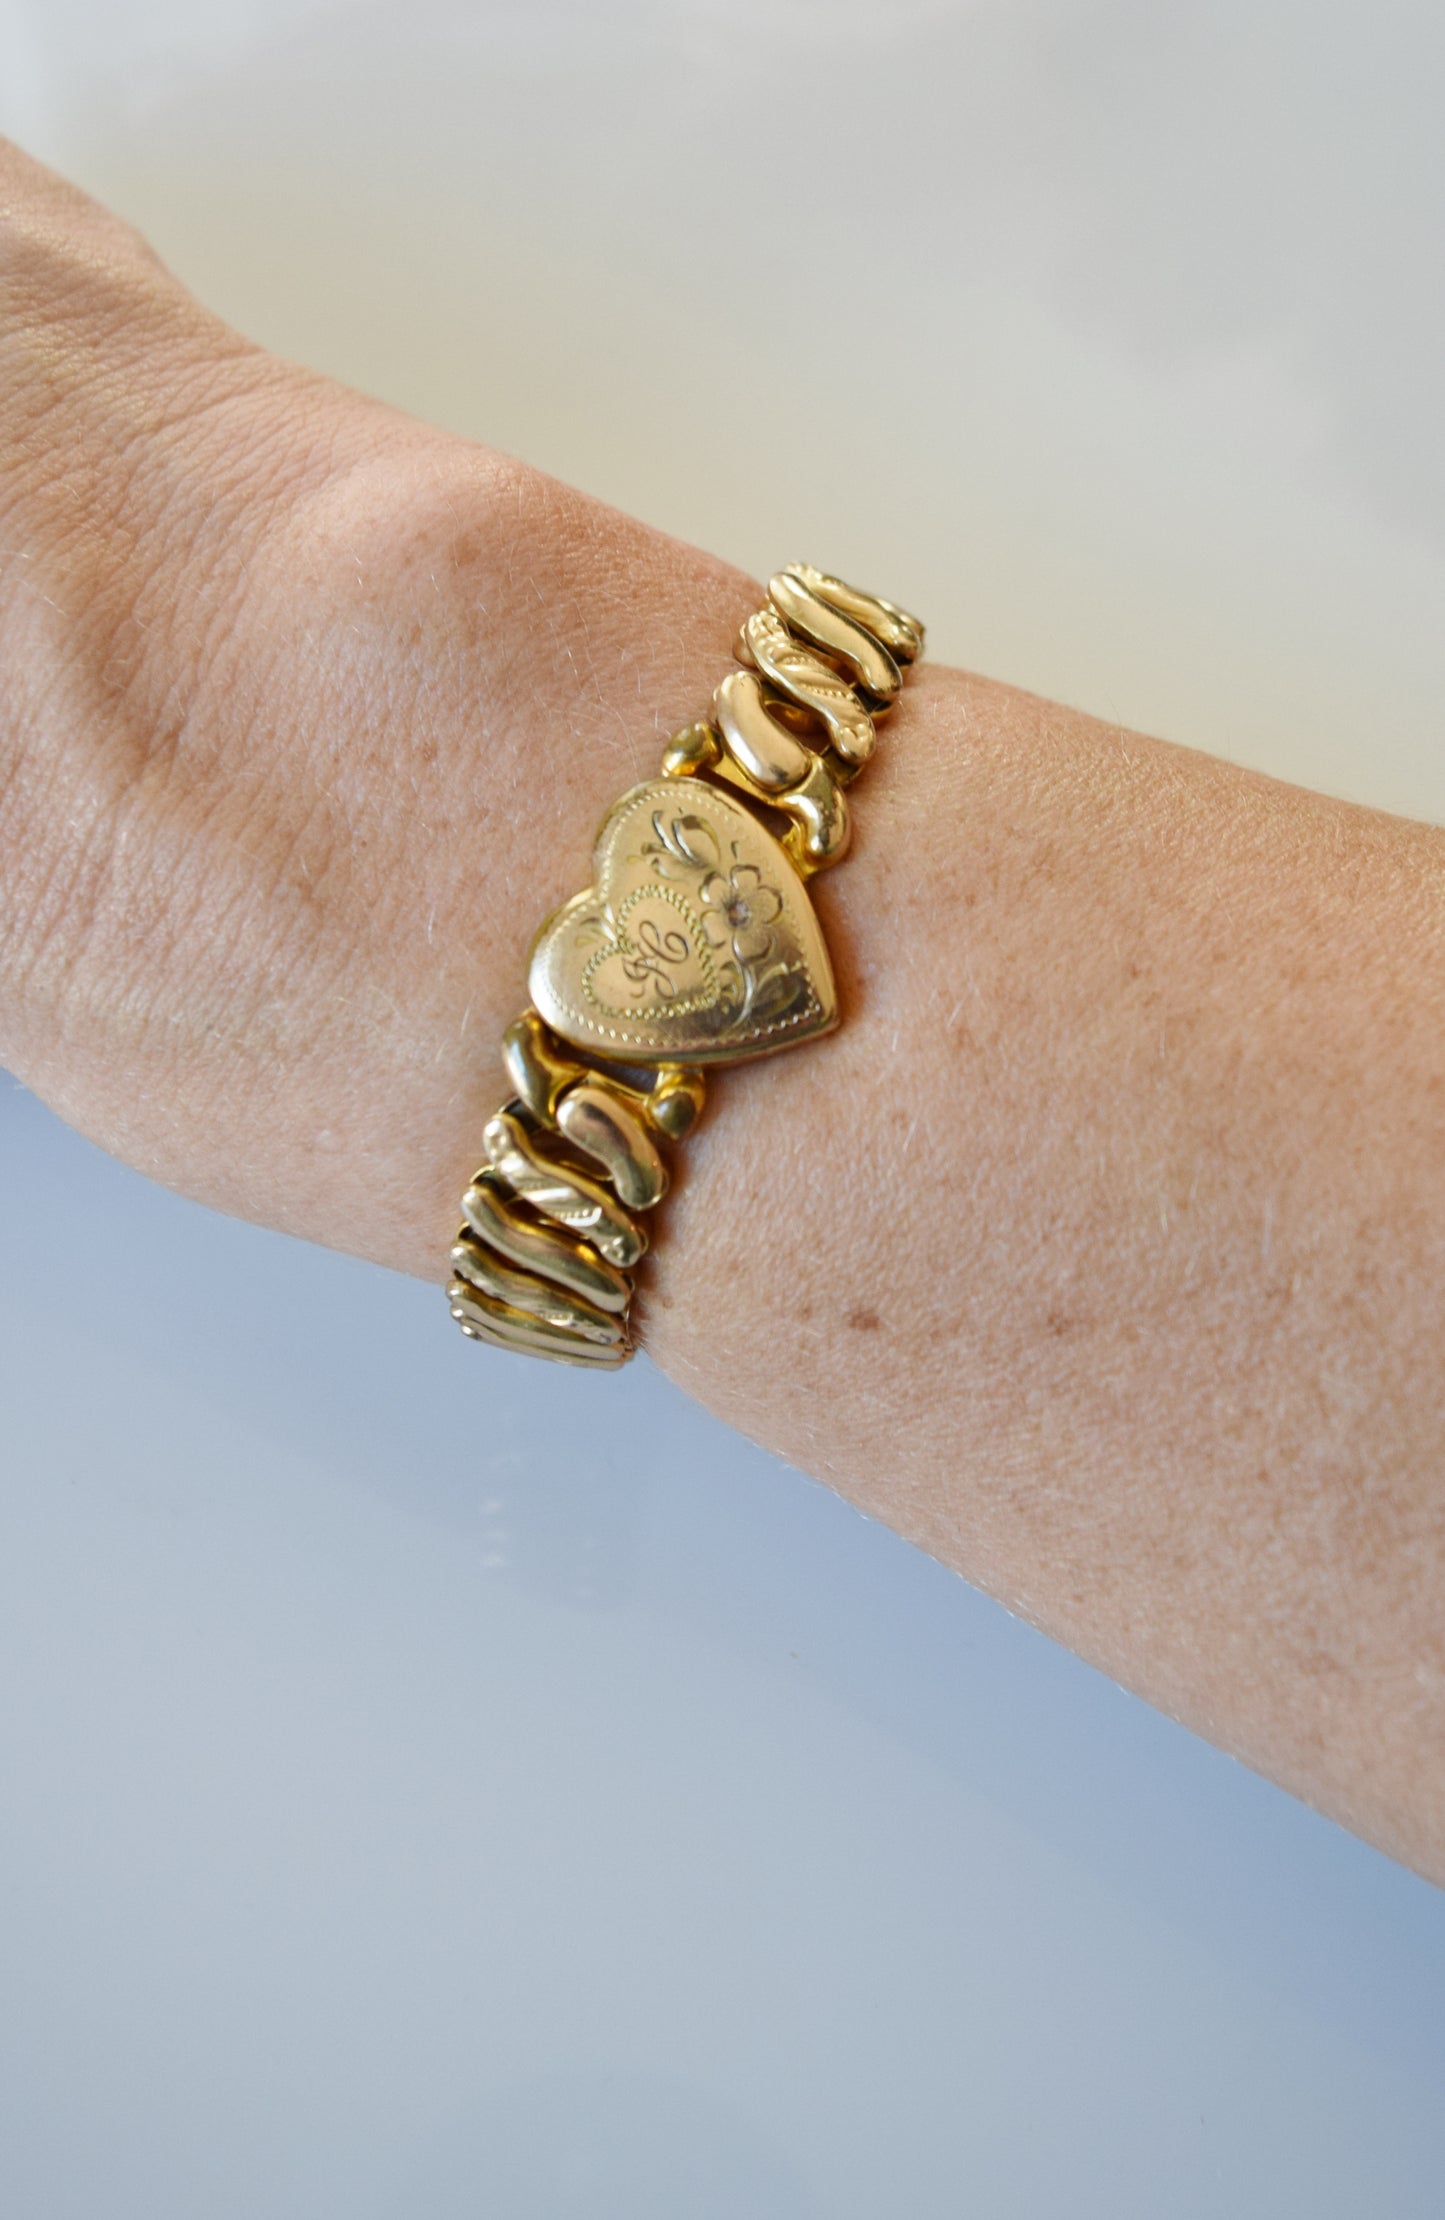 Vintage Sweetheart Expansion Bracelet with Engraved Heart Charm | "H"